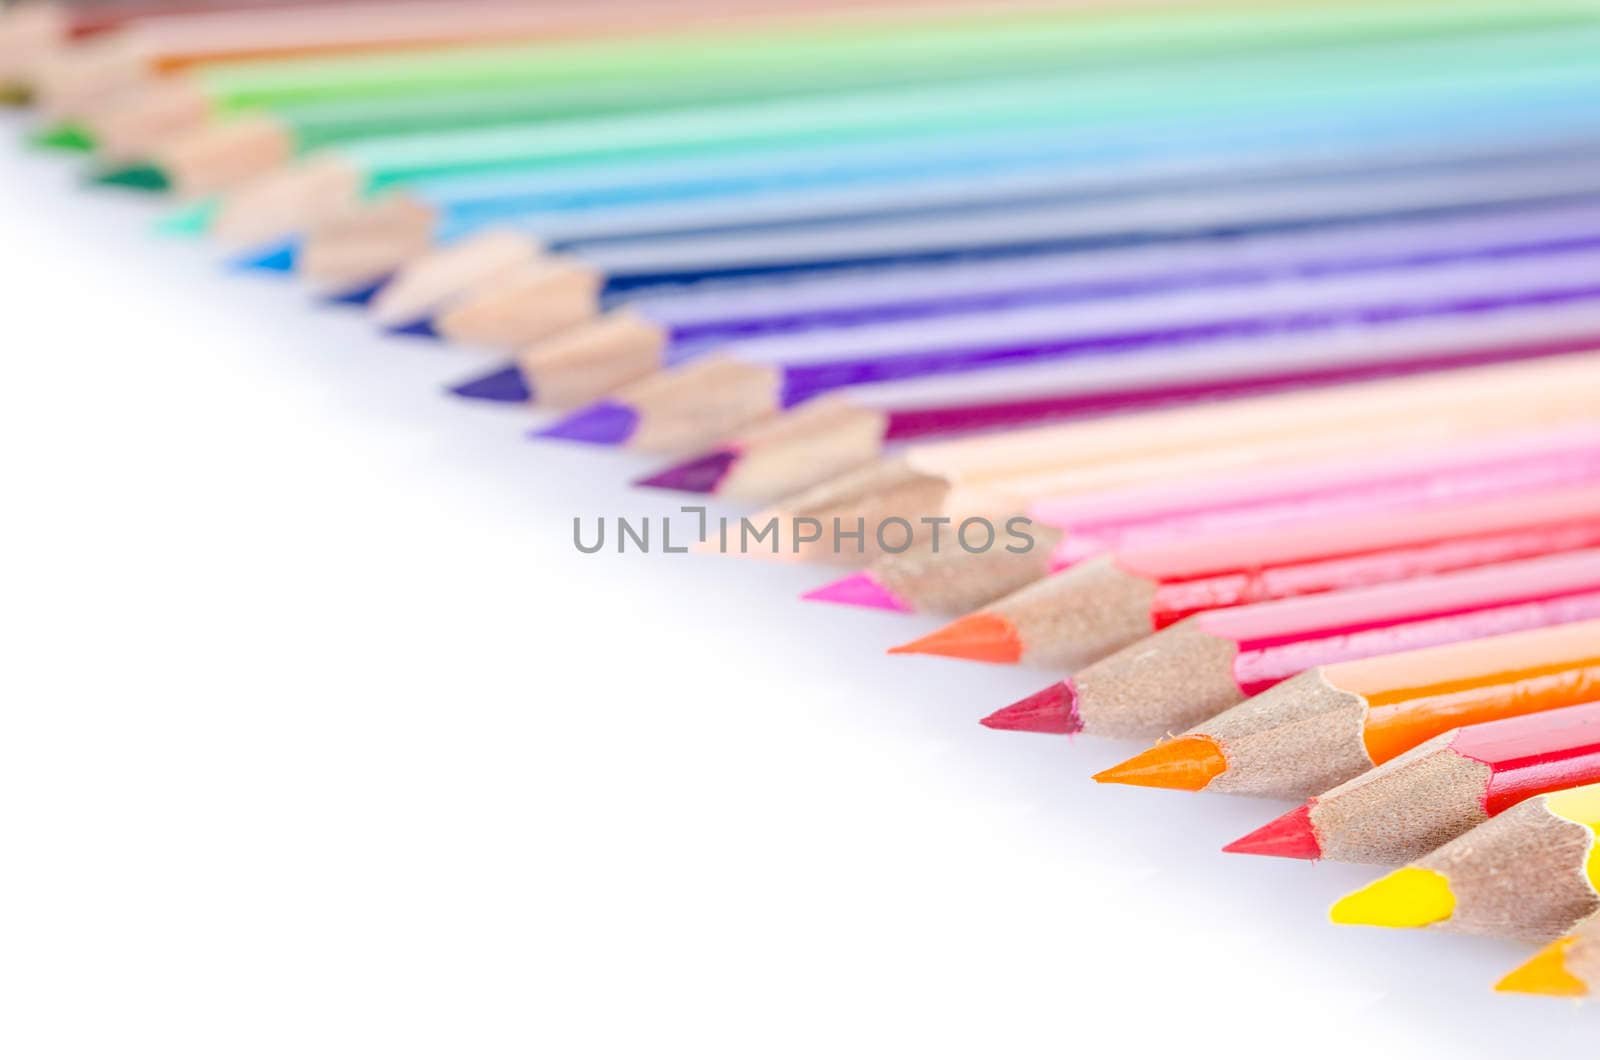 line of colored pencils by Gamjai